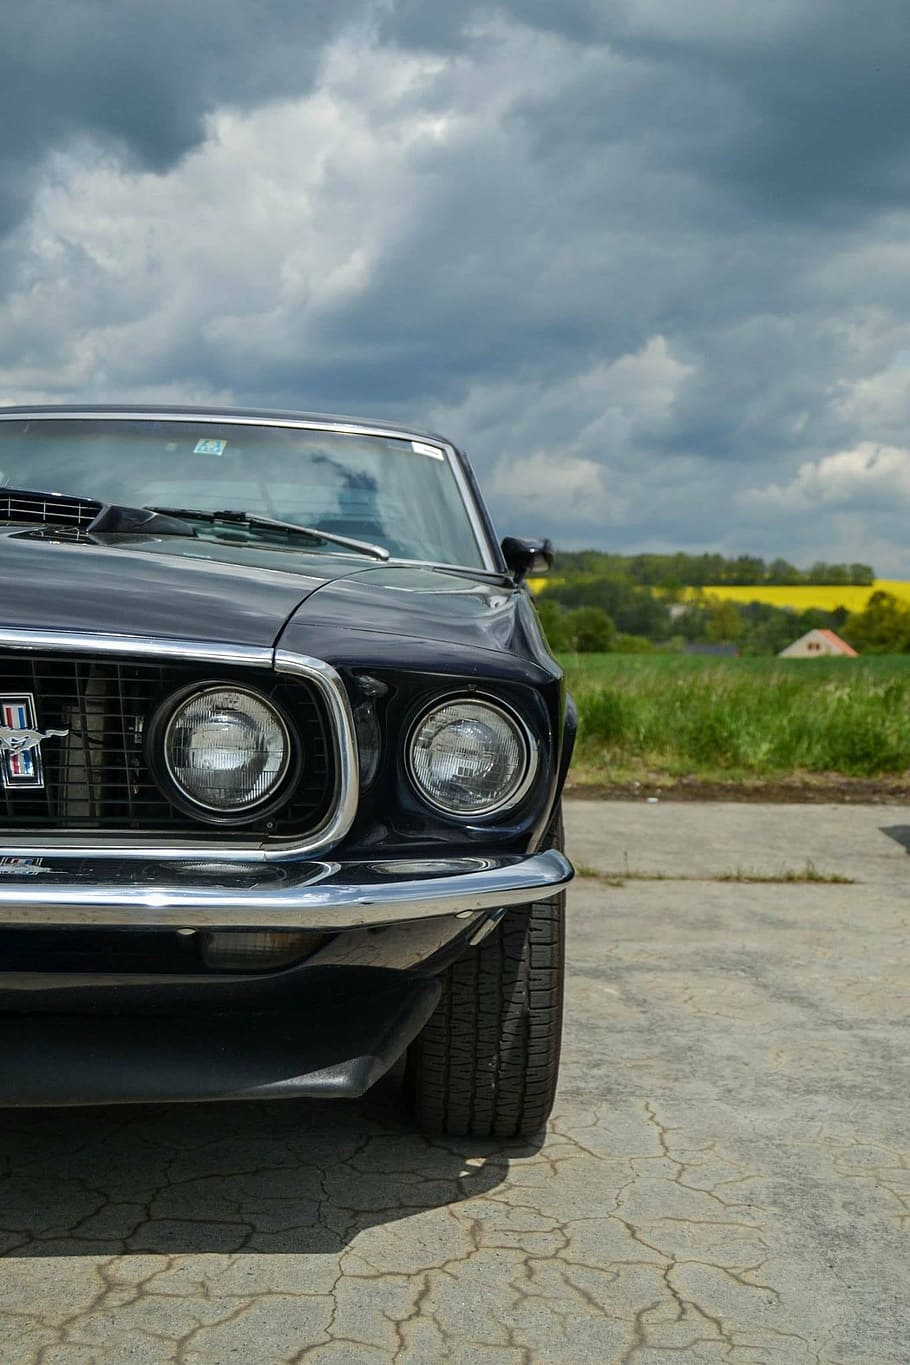 black, ford mustang coupe, ford, mustang, old, tsar, oldschool, car, cloud - sky, transportation